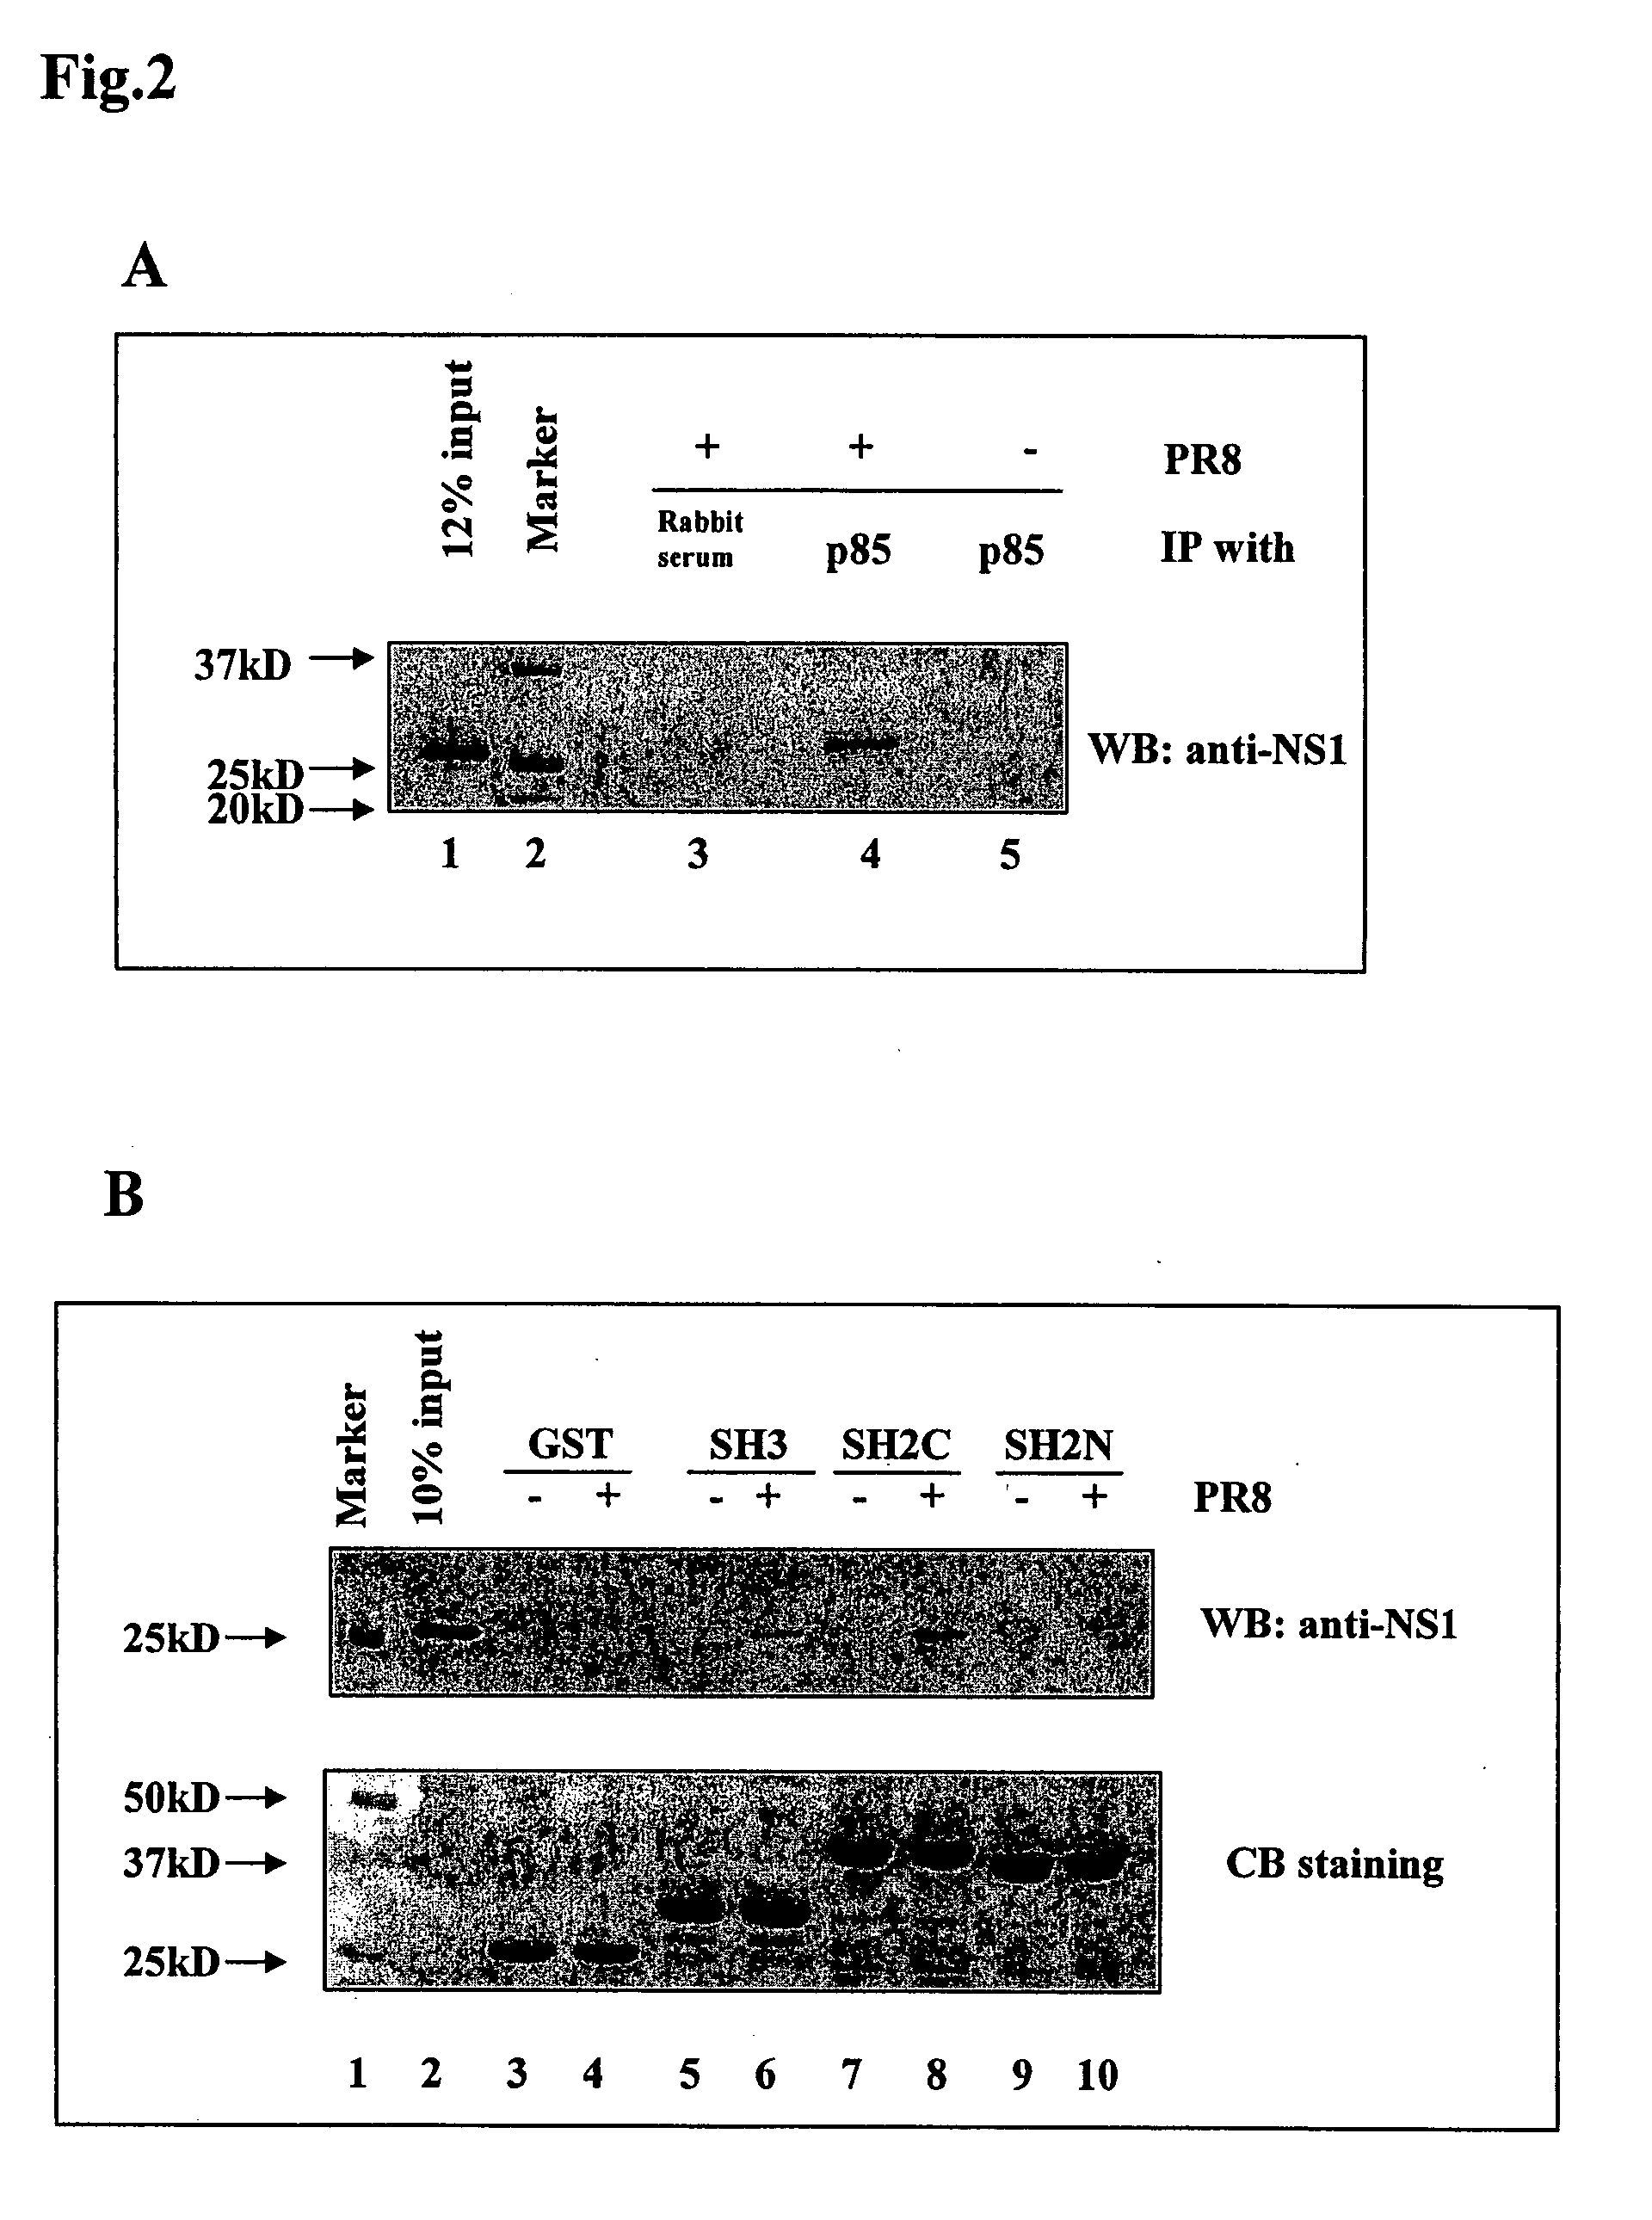 Attenuated influenza NS1 variants